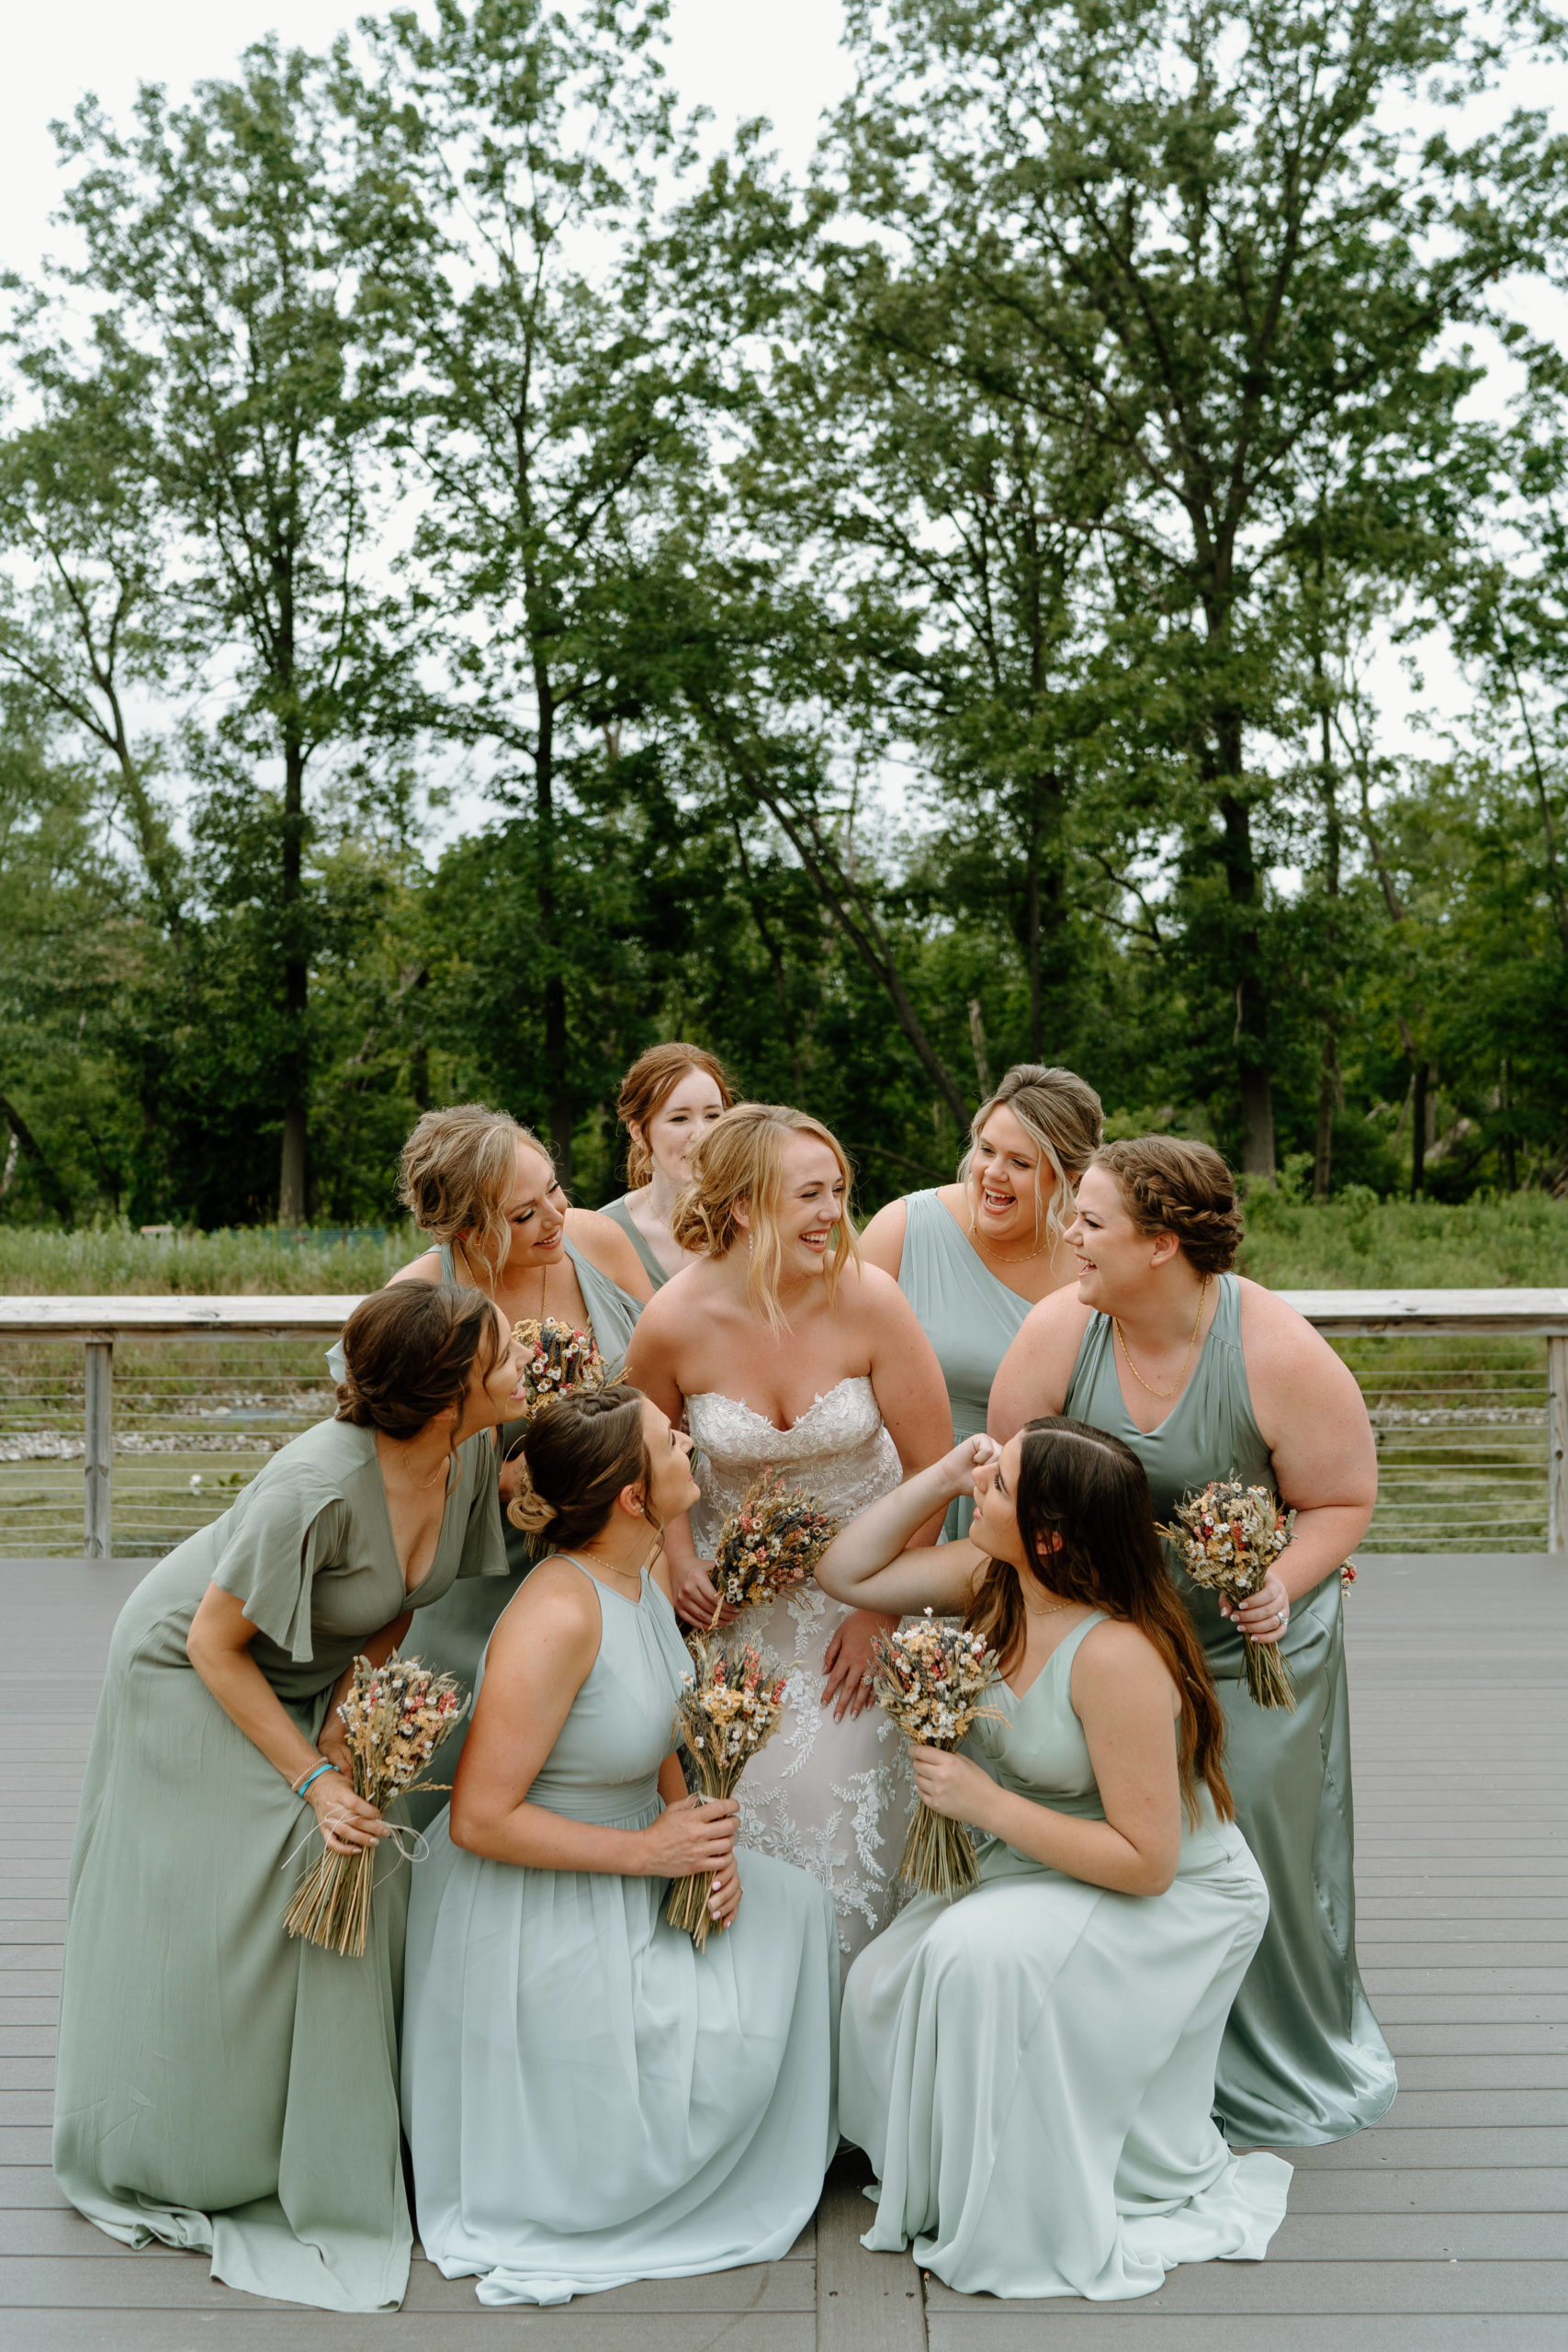 This is a group of bridesmaids taking a picture with the bride on her wedding day